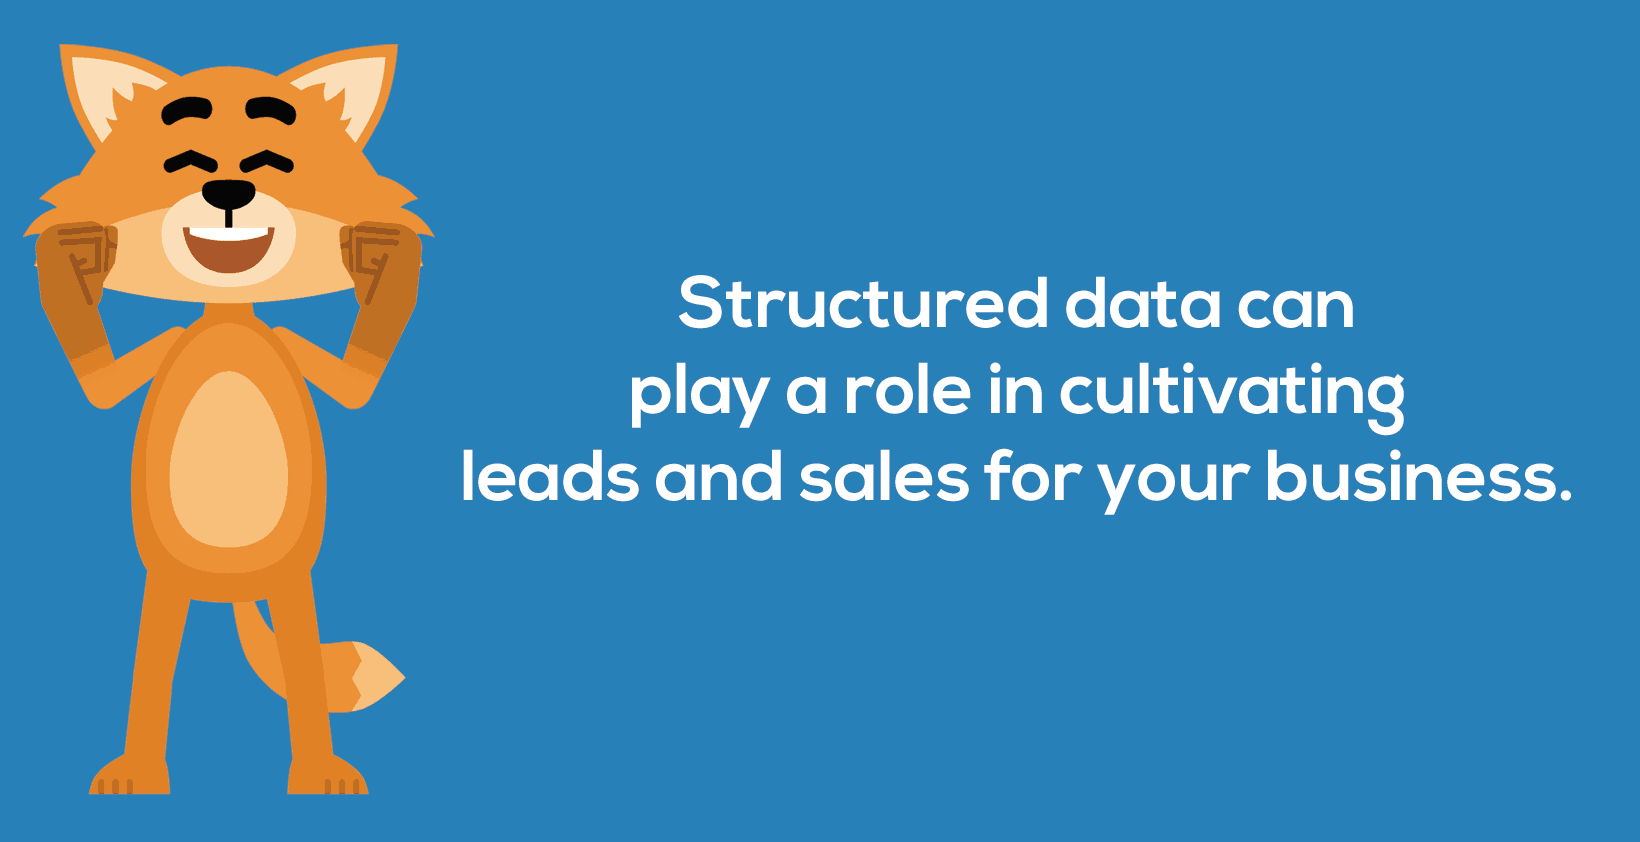 Structured data can play a role in cultivating leads and sales for your business.